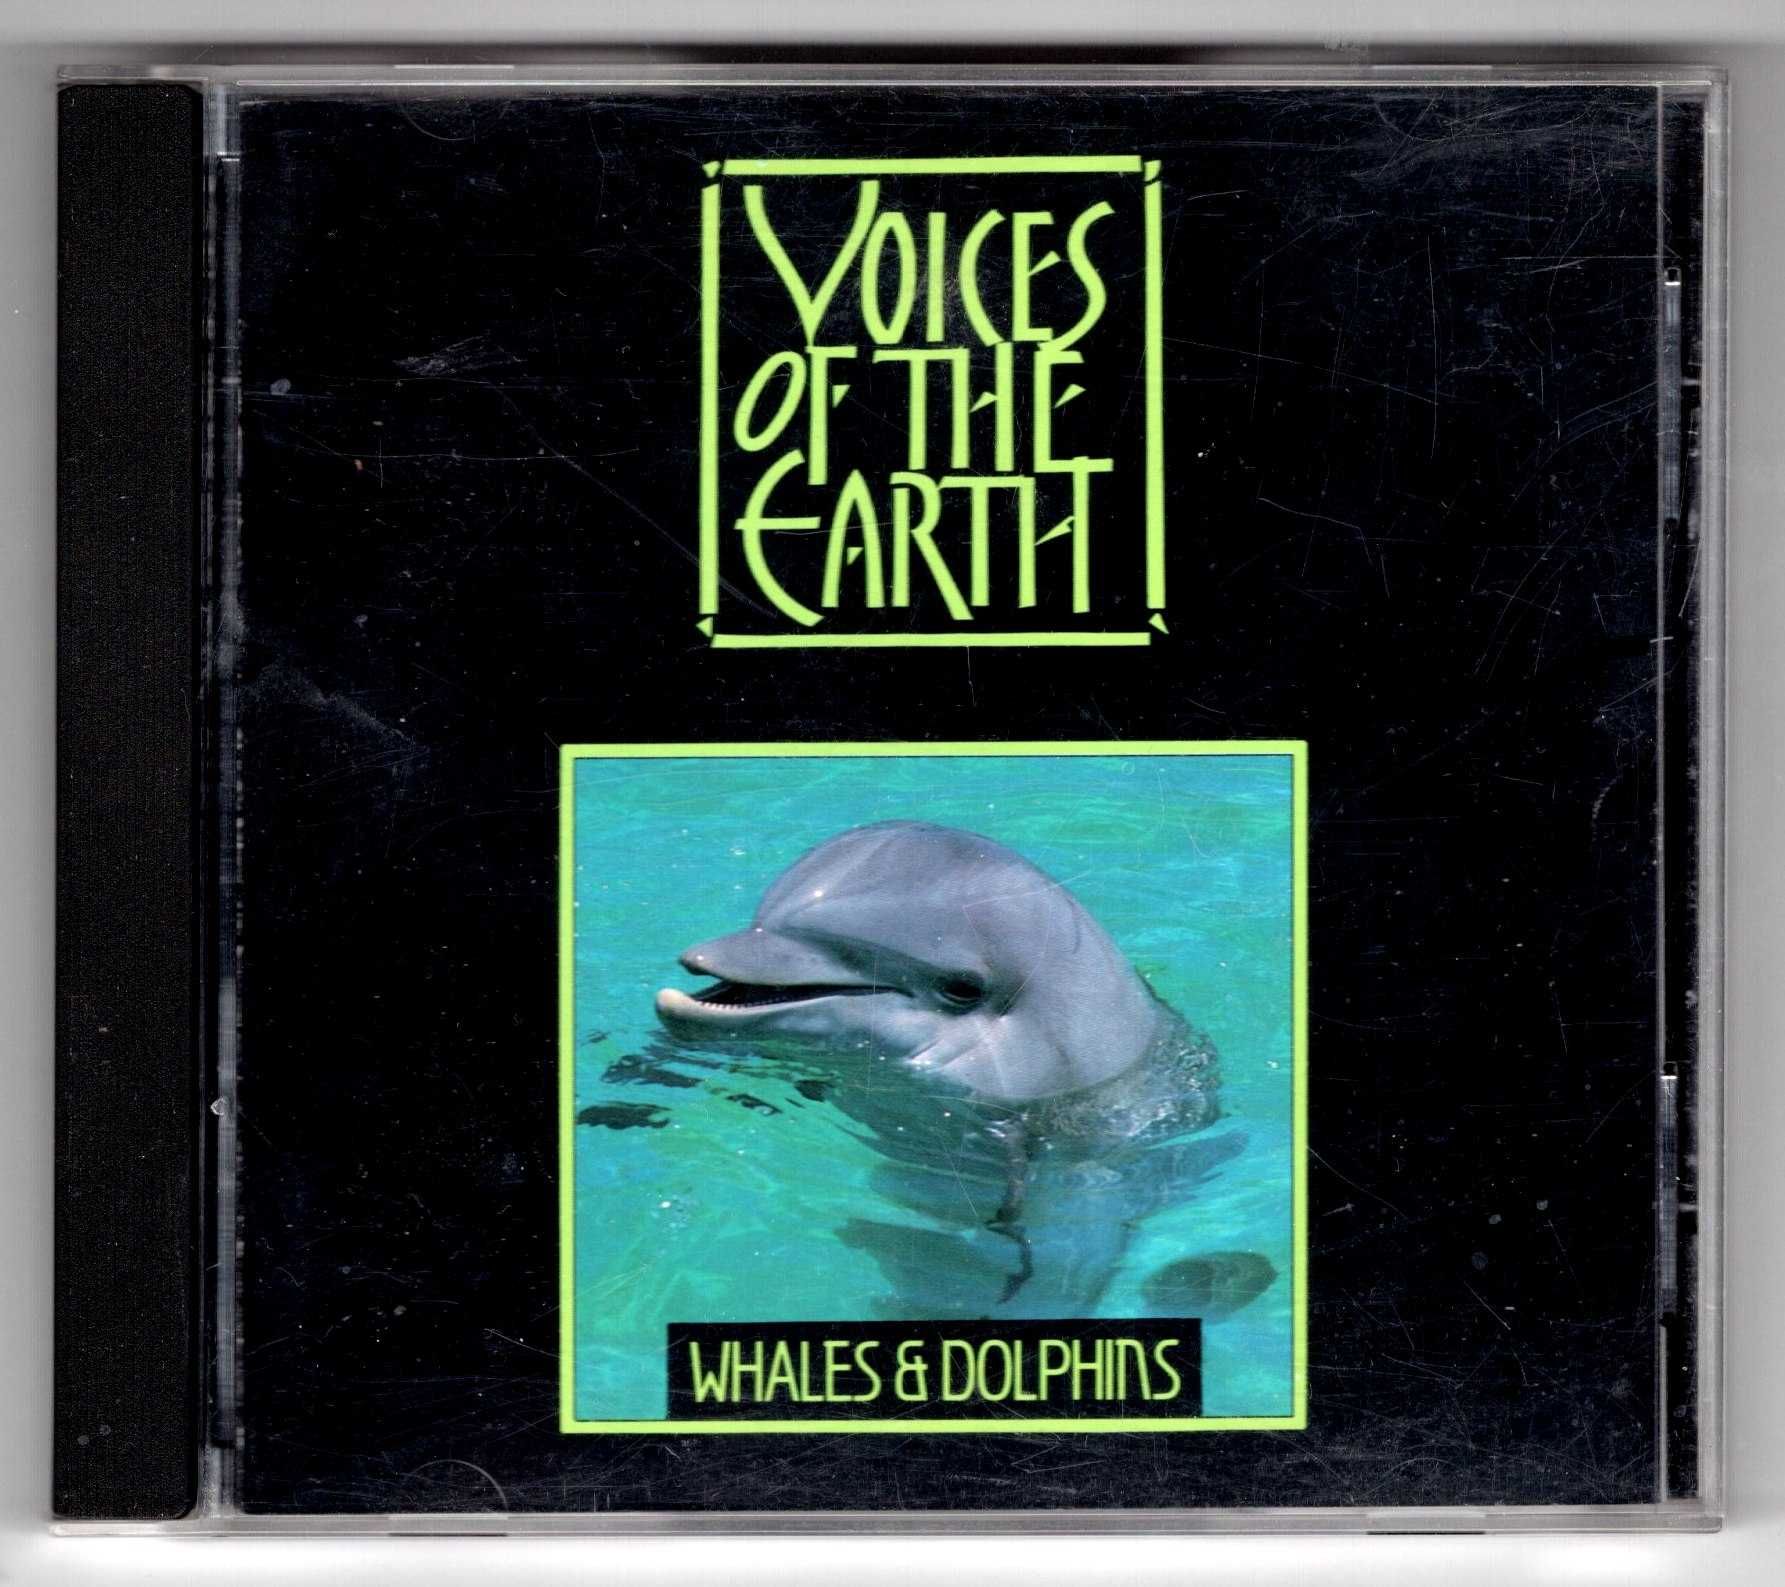 Whales & Dolphins - Voices Of The Earth (CD)